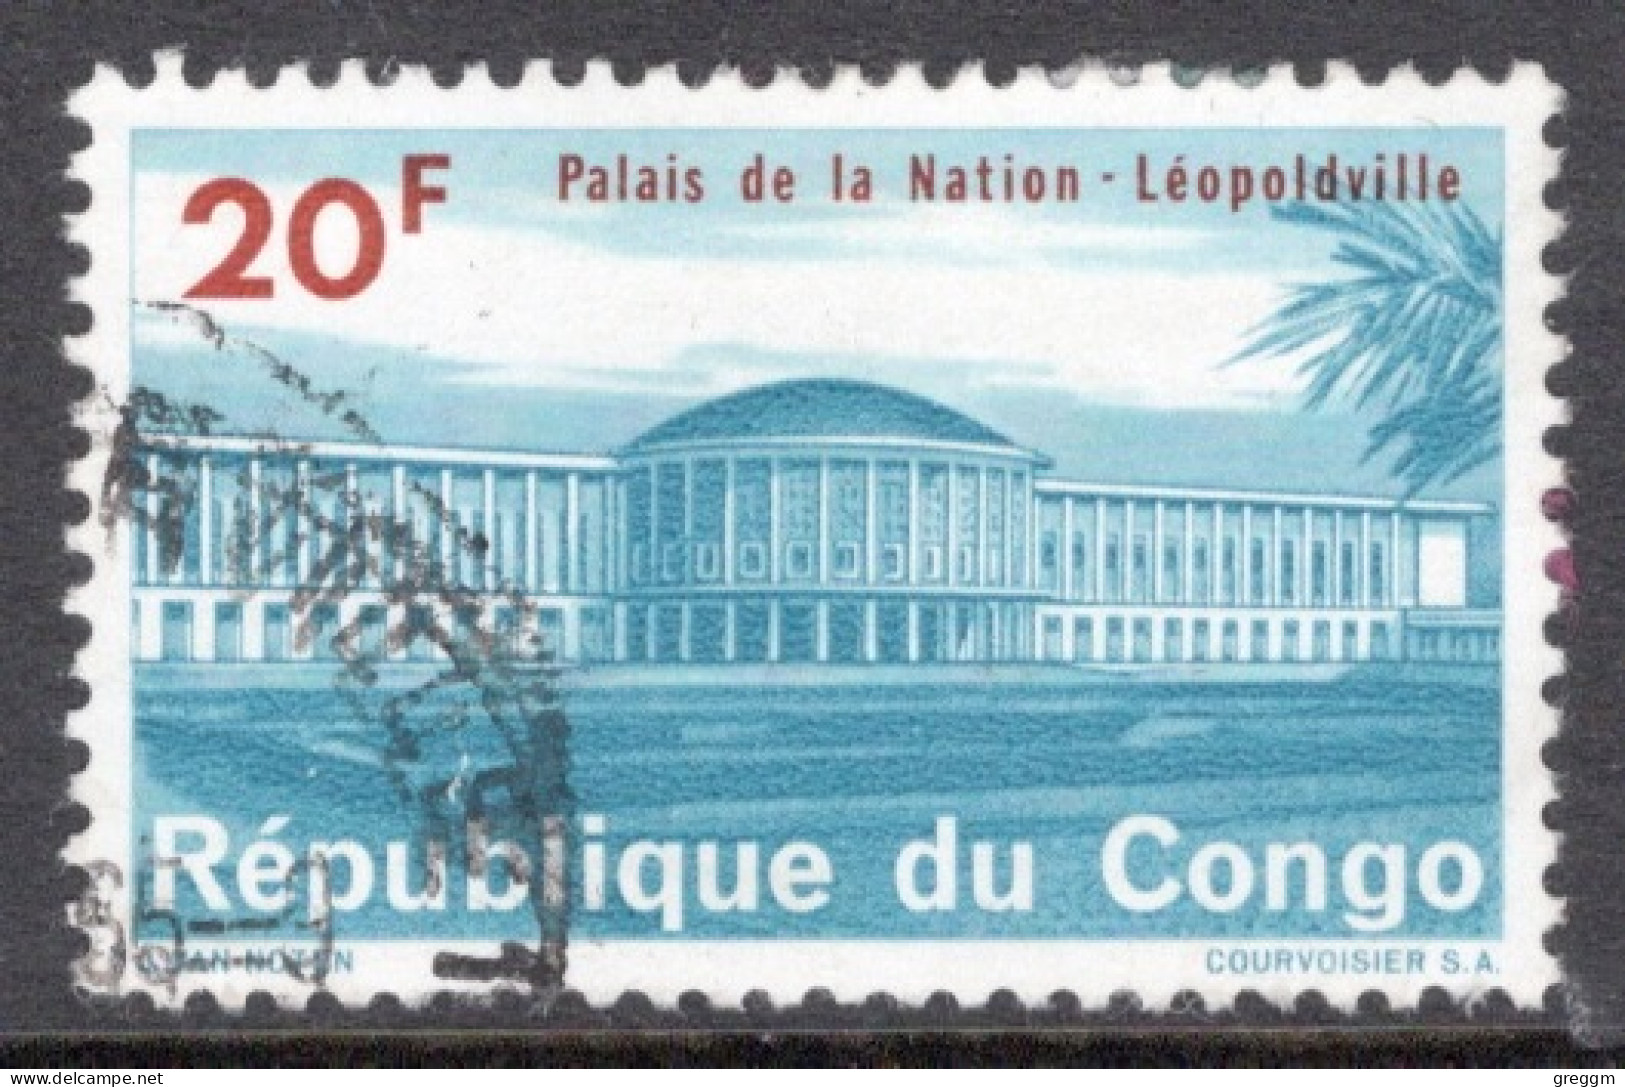 Kinshasa Congo 1964 Single 20f Stamp From The Definitive Set  National Palace, Leopoldville  In Fine Used. - Gebraucht